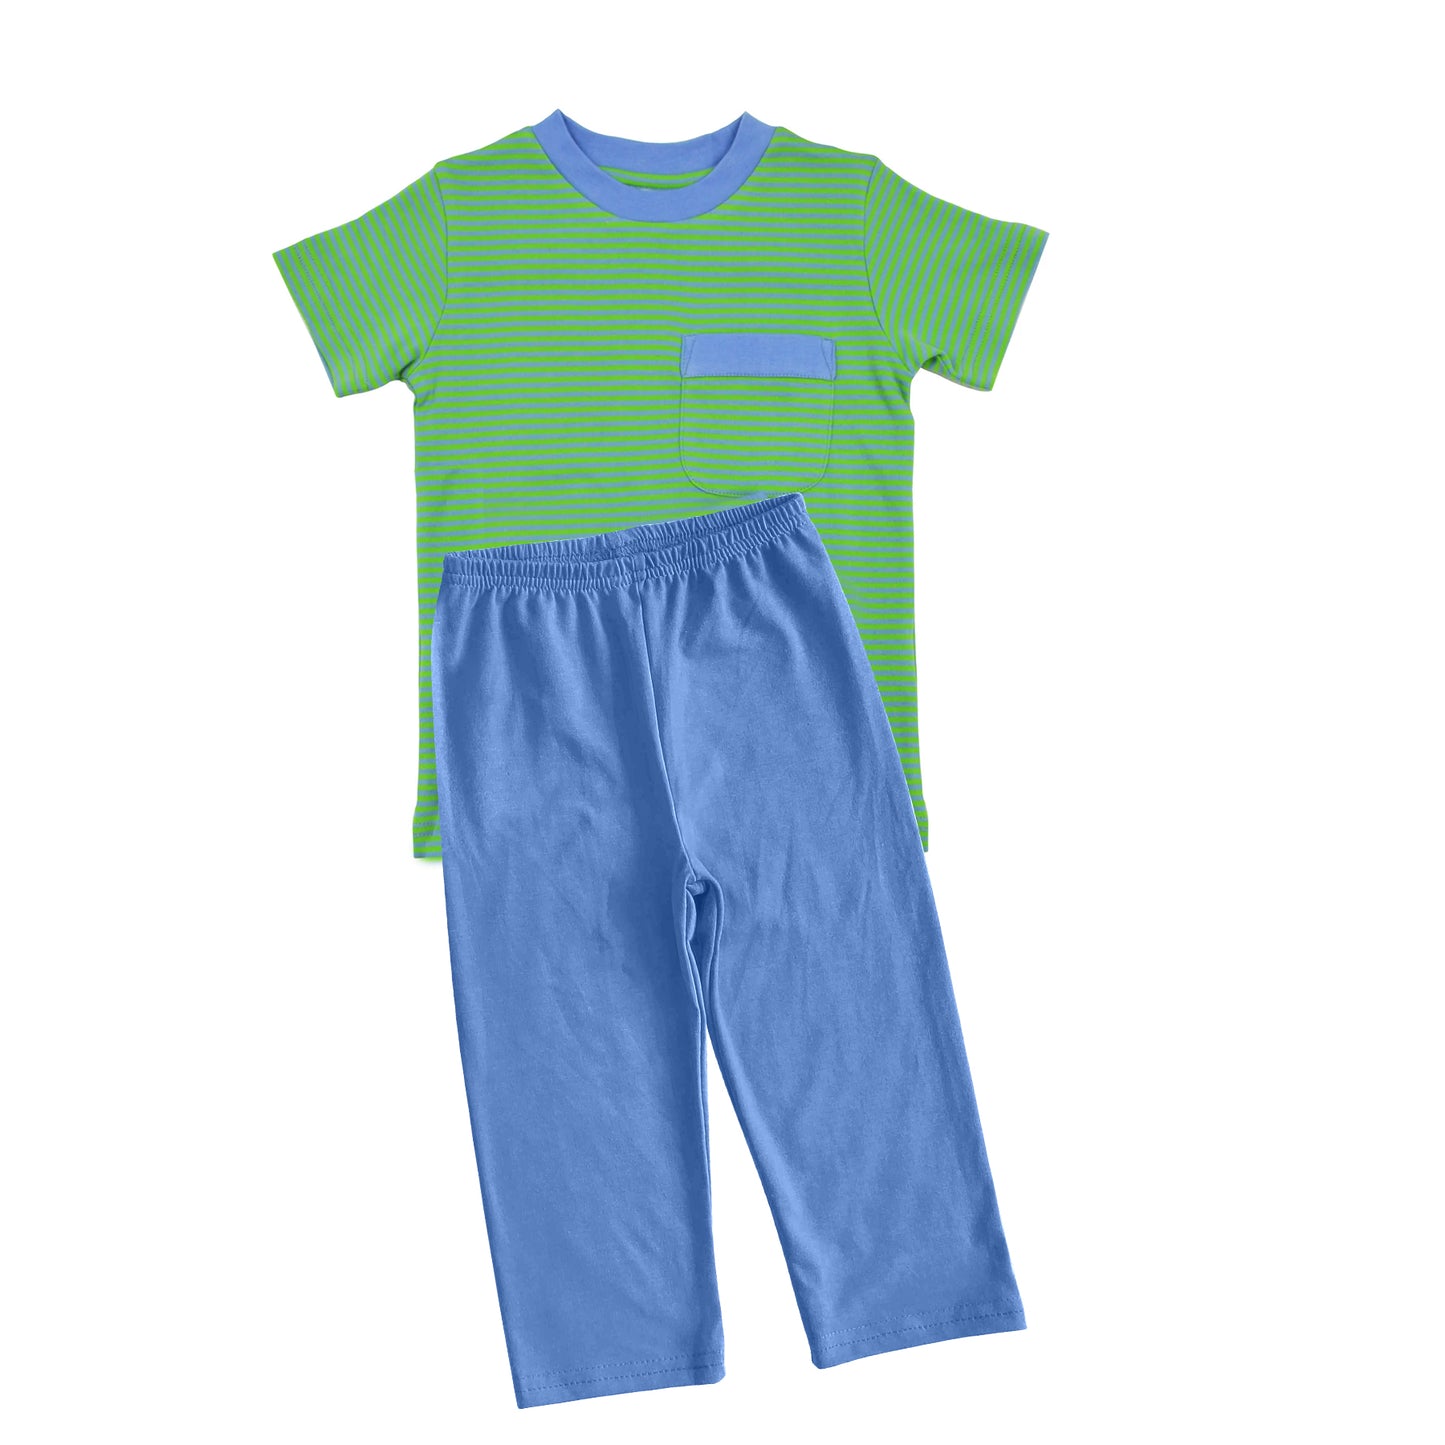 No moq BSPO0457 Pre-order Size 3-6m to 7-8t baby boy clothes short sleeve top with trousers kids autumn set